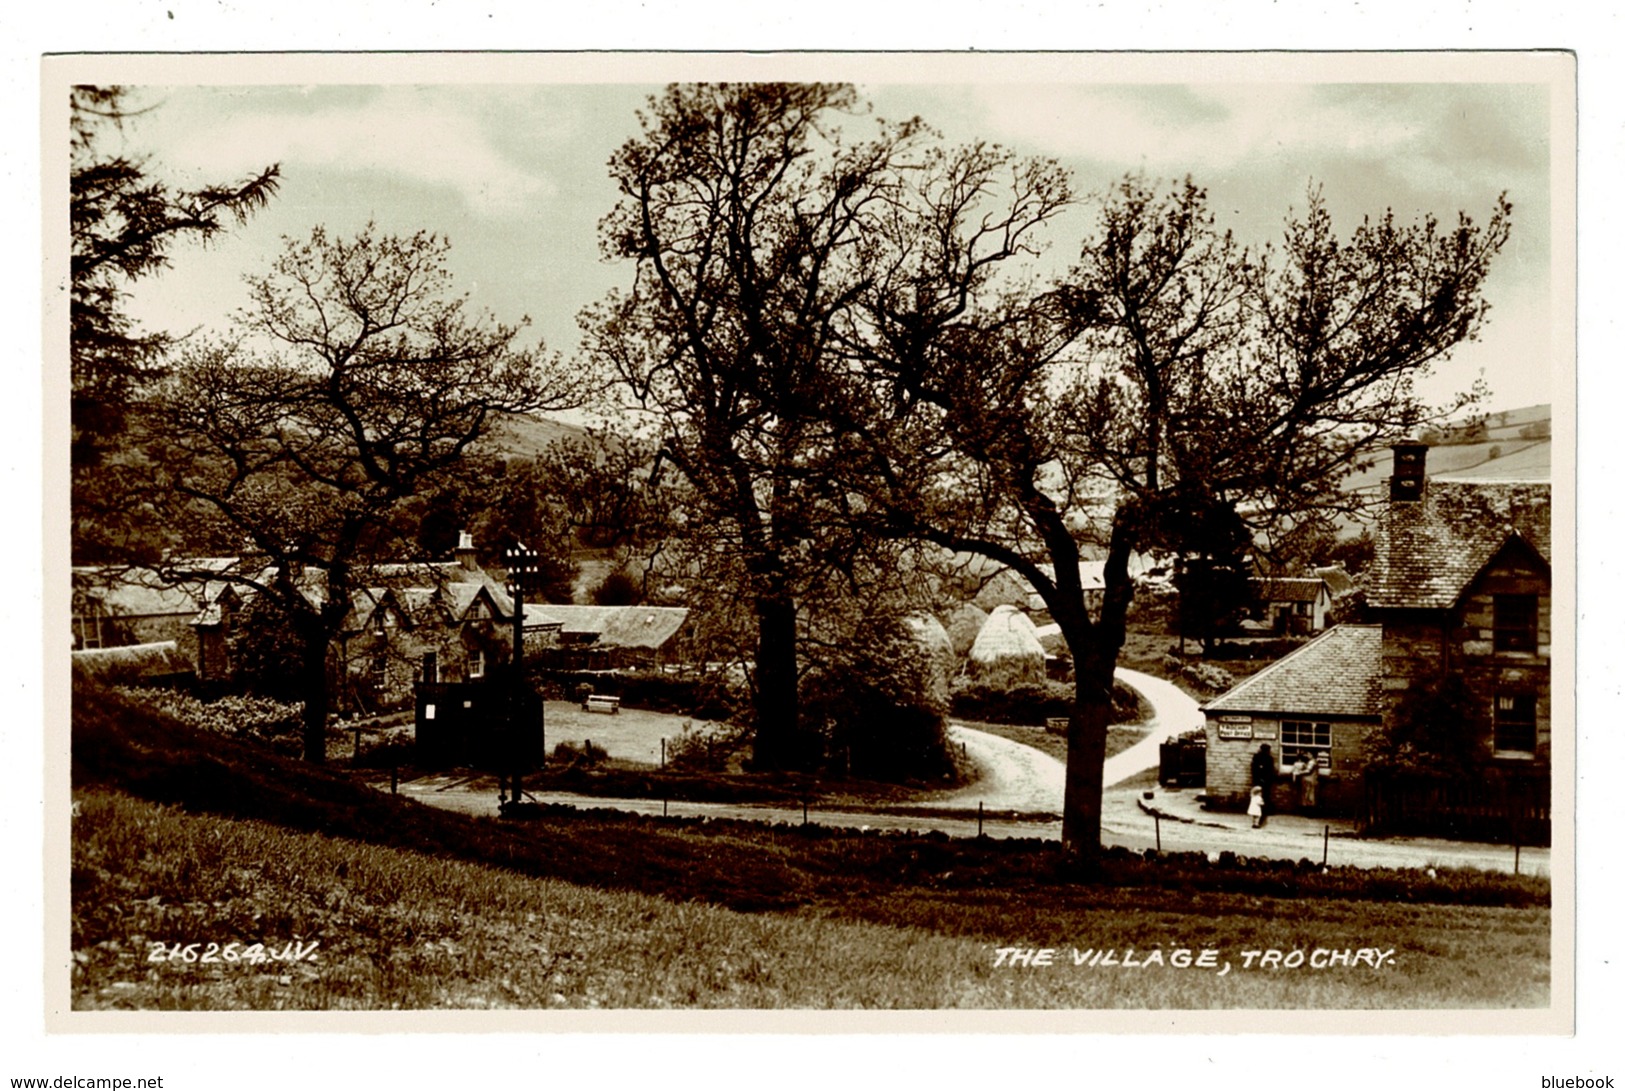 Ref 1355 - 1935 Real Photo Postcard - Trochry Village & Post Office - Perthshire Scotland - Perthshire